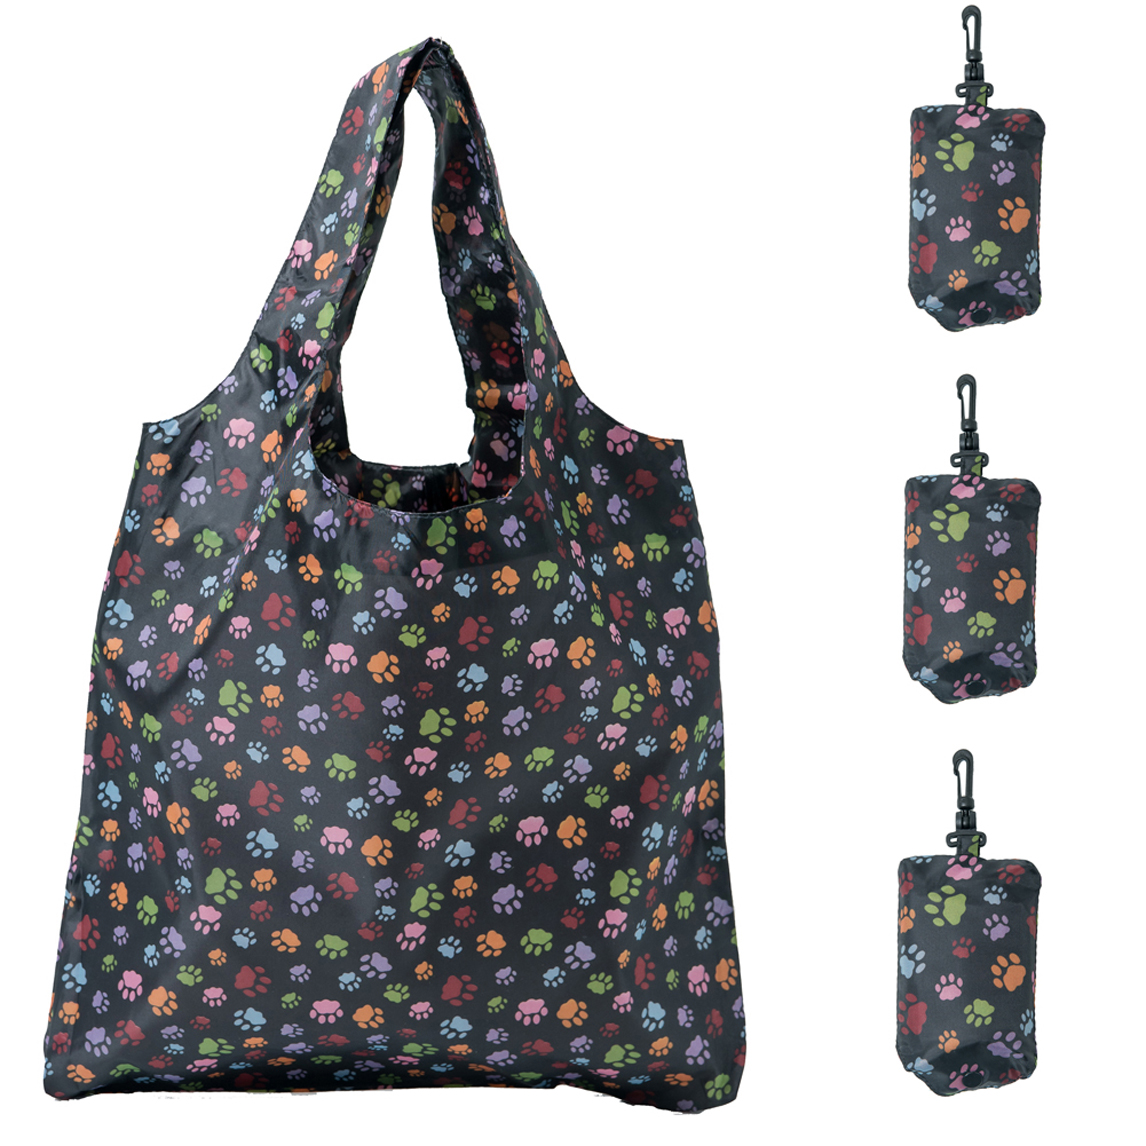 Reusable Folding Polyester Tote Bags